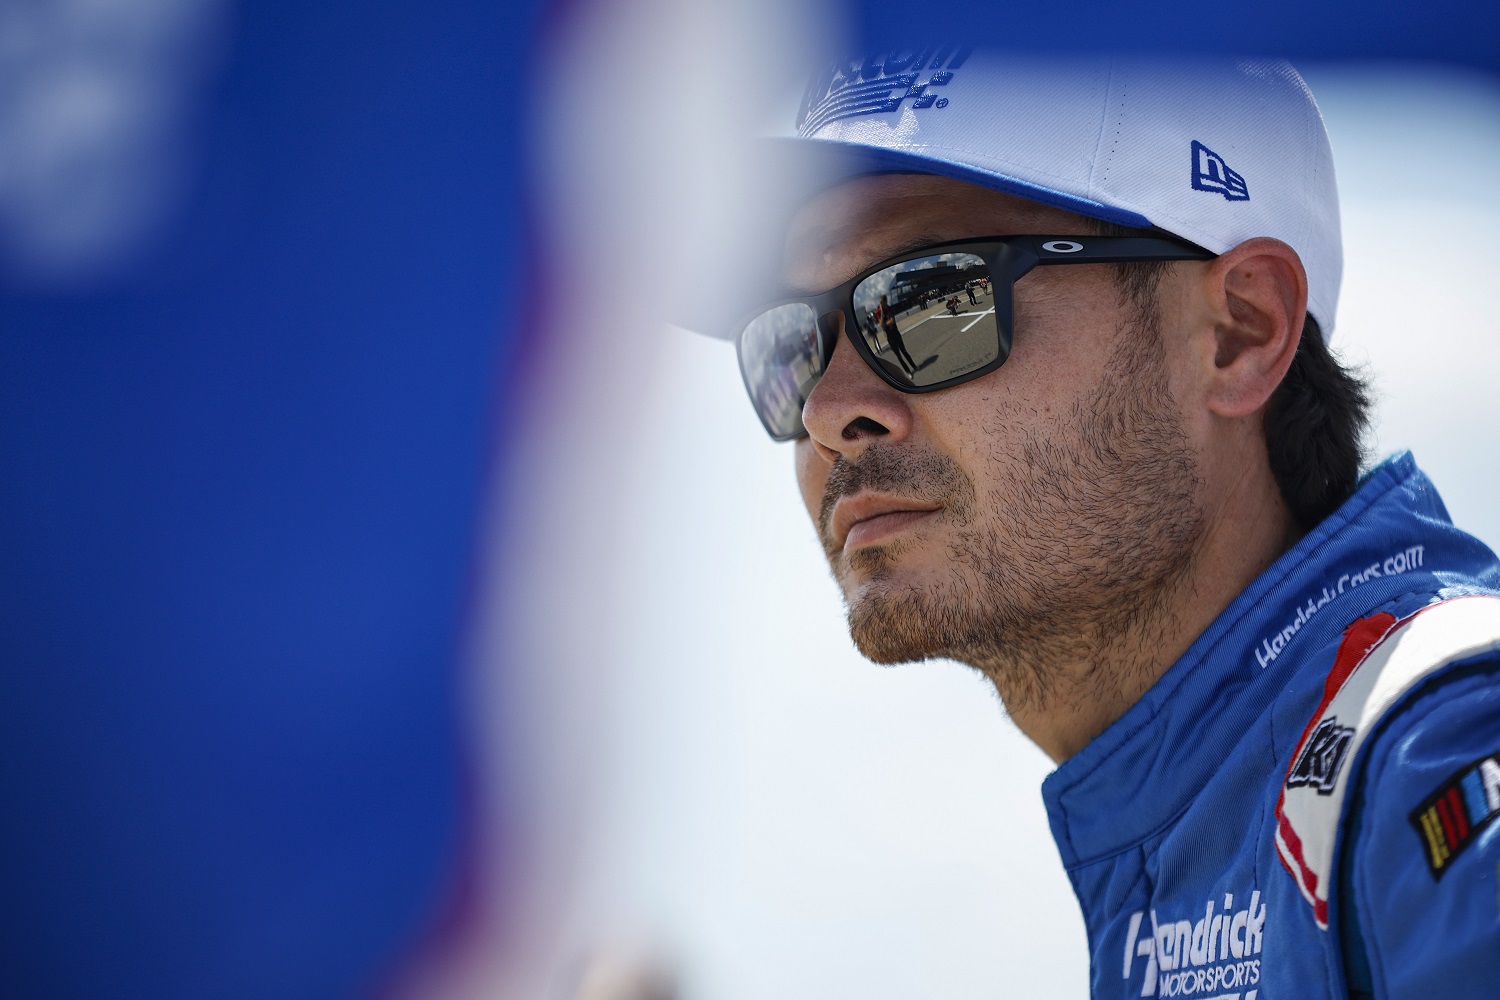 Kyle Larson looks on during practice for the NASCAR Cup Series FireKeepers Casino 400 at Michigan International Speedway on Aug. 6, 2022.